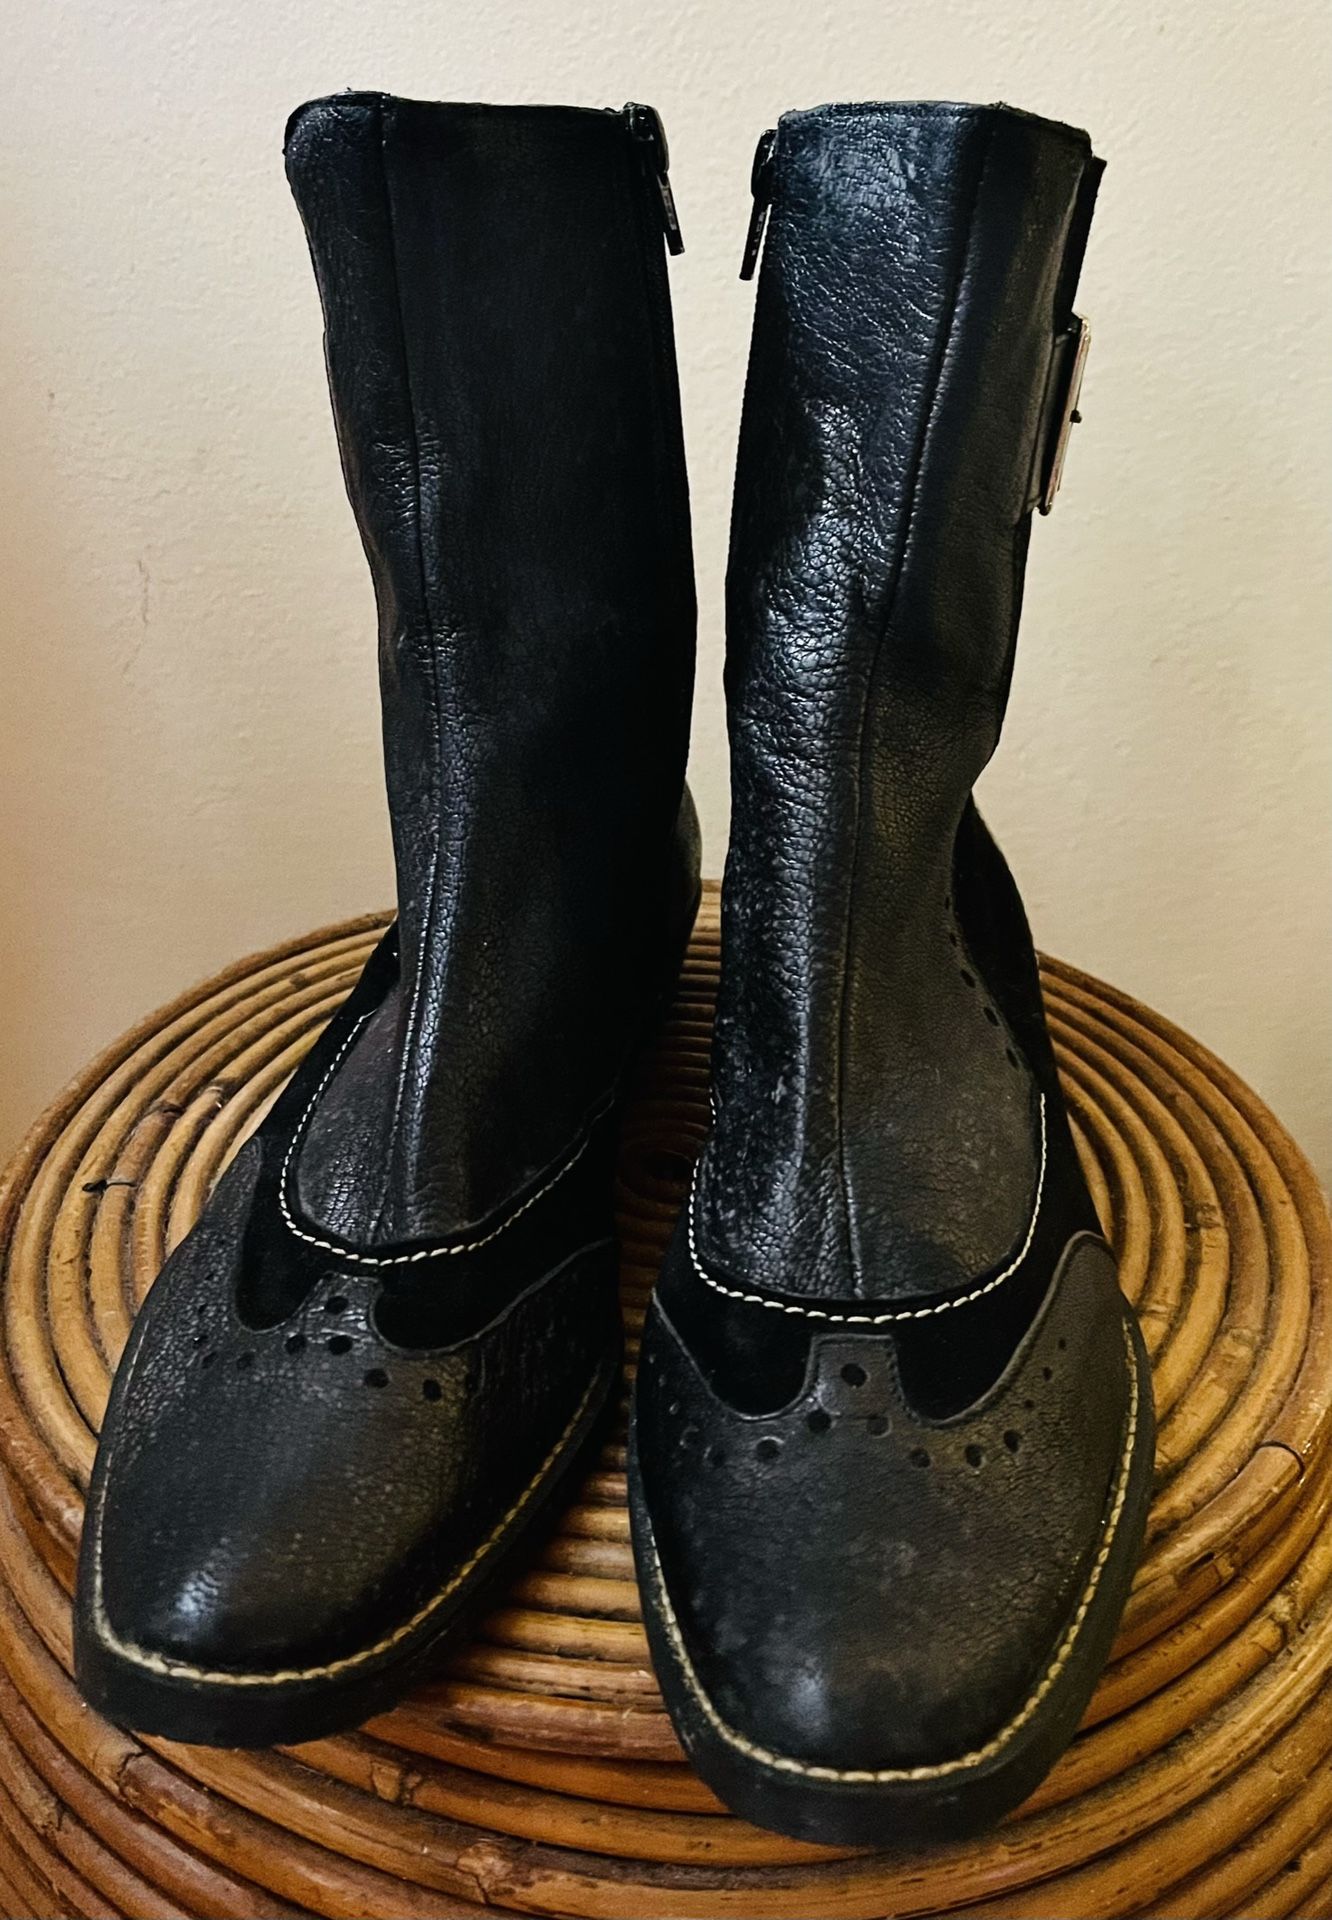 Anthropologie Black Exquisite Boots / Size 36